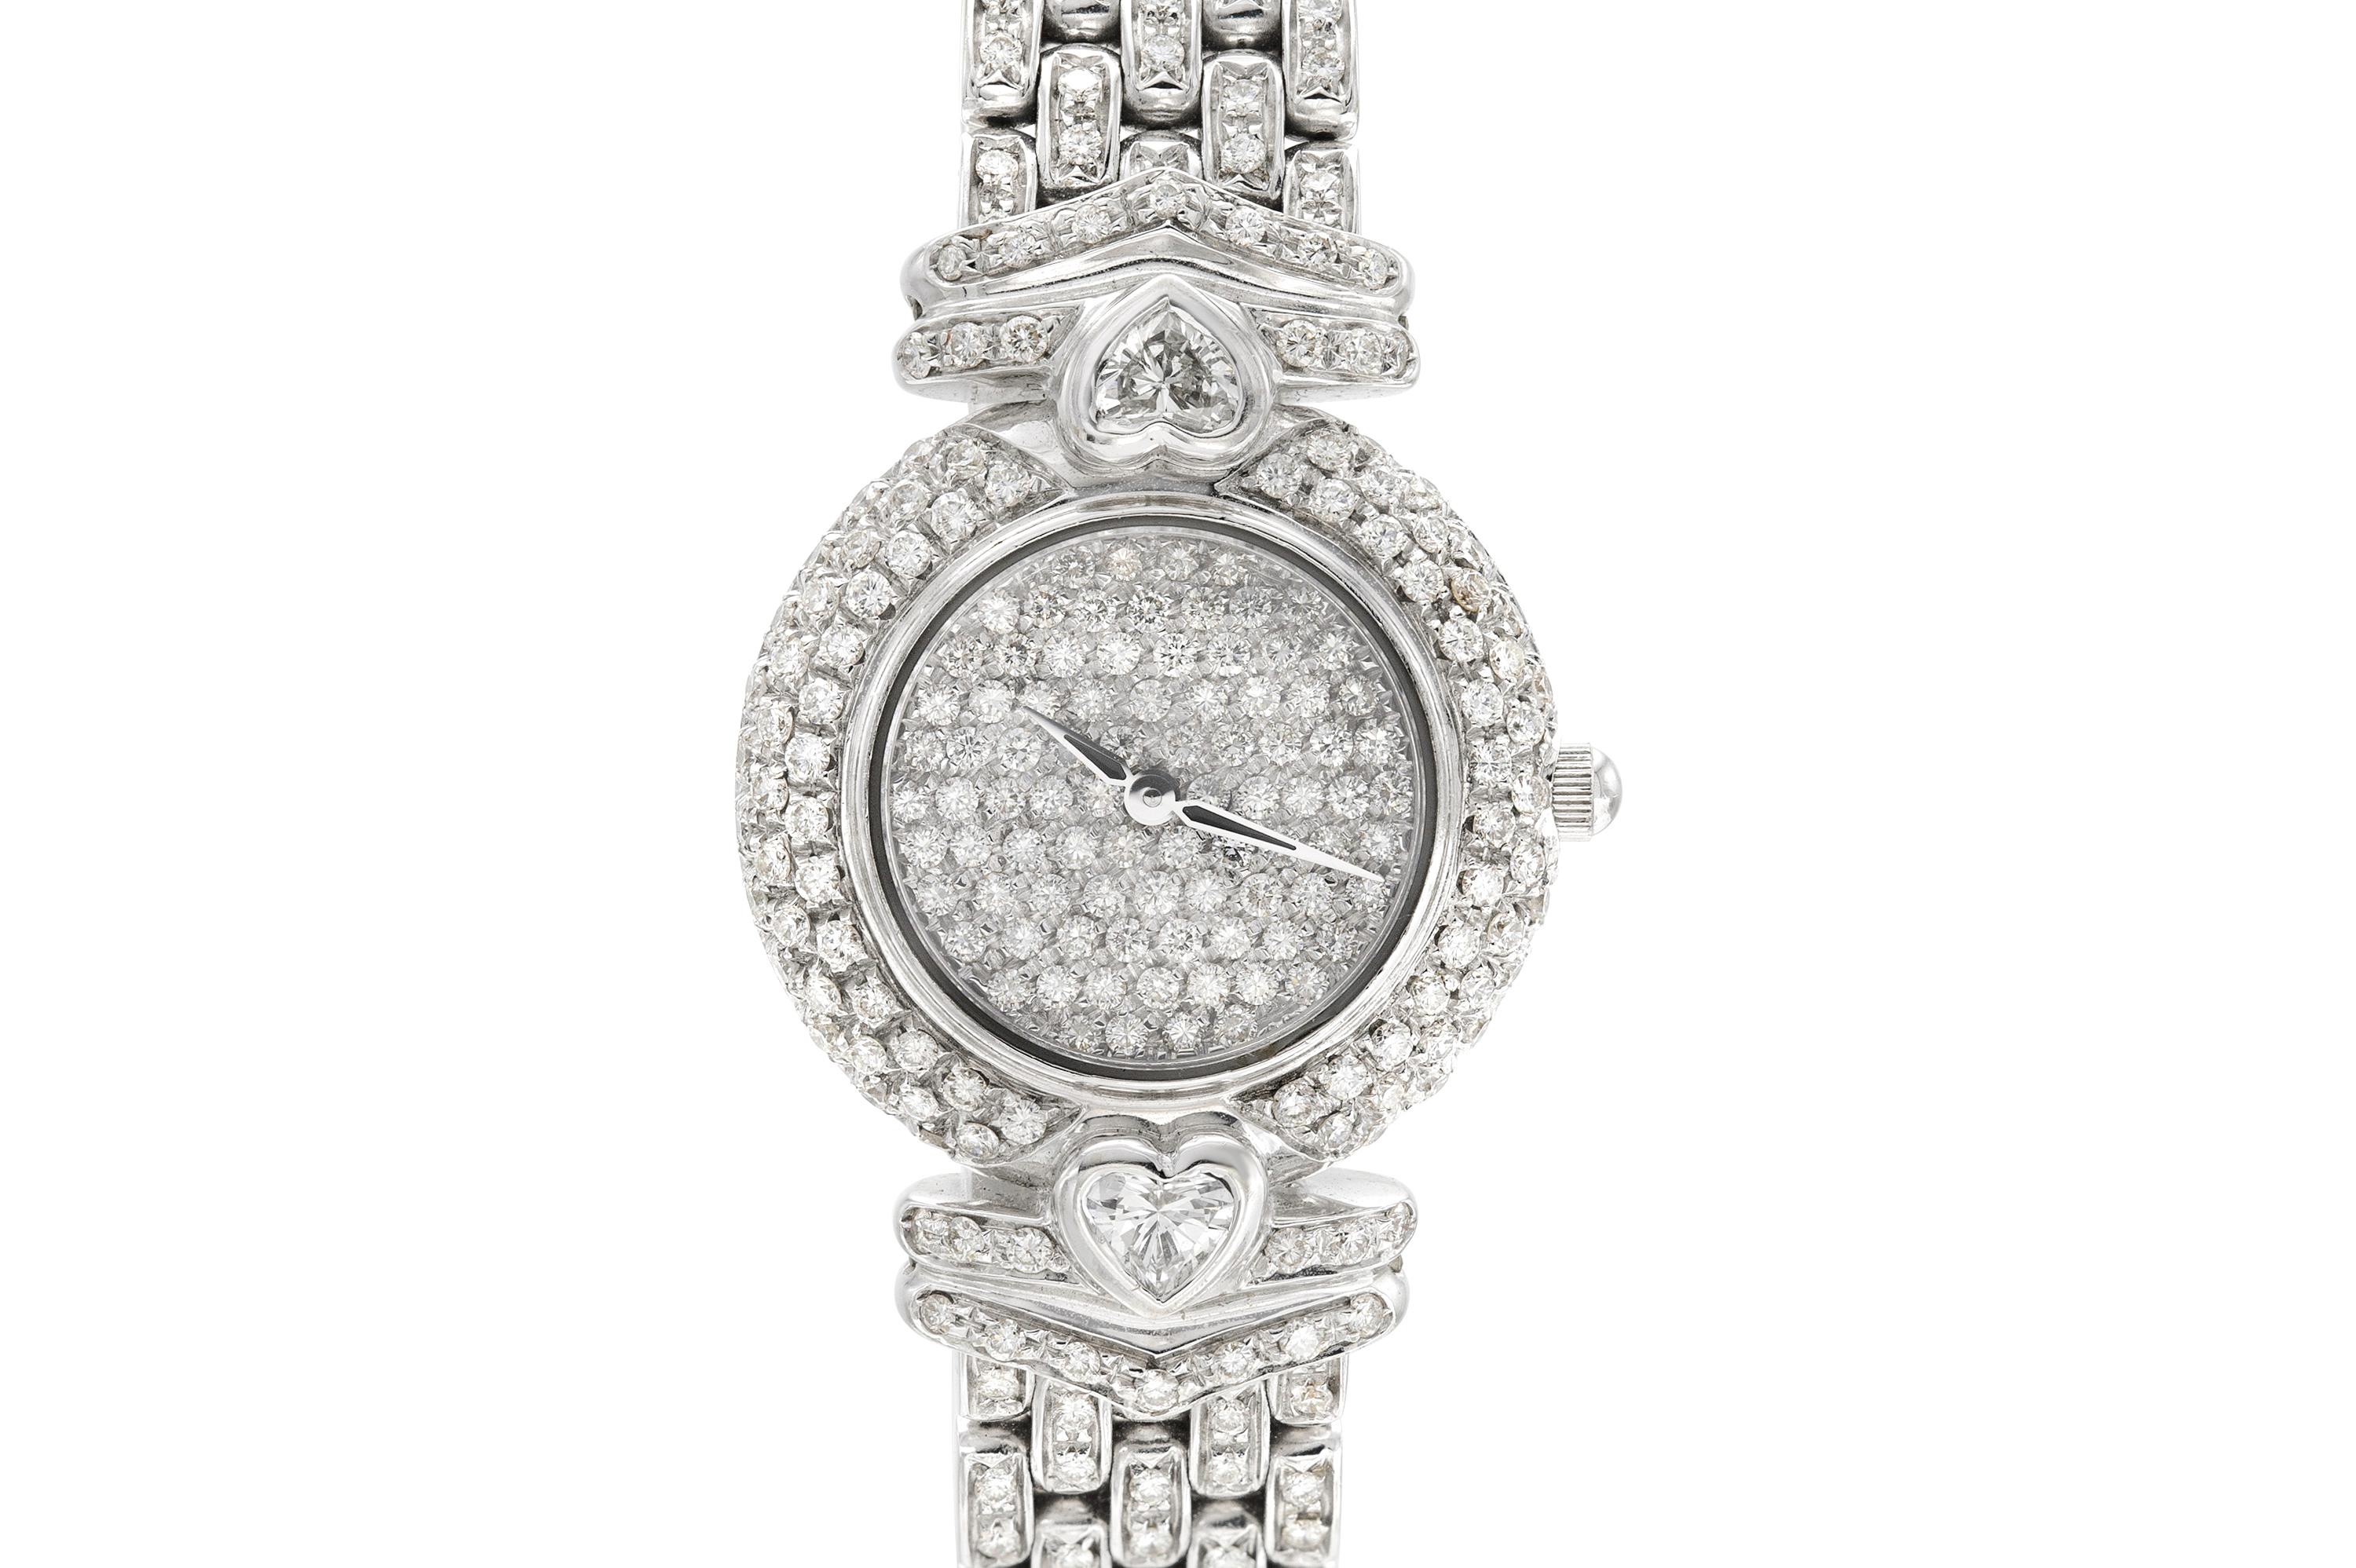 Finely crafted in 18k white gold with two Heart-shaped diamonds weighing a total of 0.80 carats and round brilliant cut diamonds on the face, the dial, and the band, weighing approximately a total of 4.00 carats.
Quartz, 23mm dial
Signed by